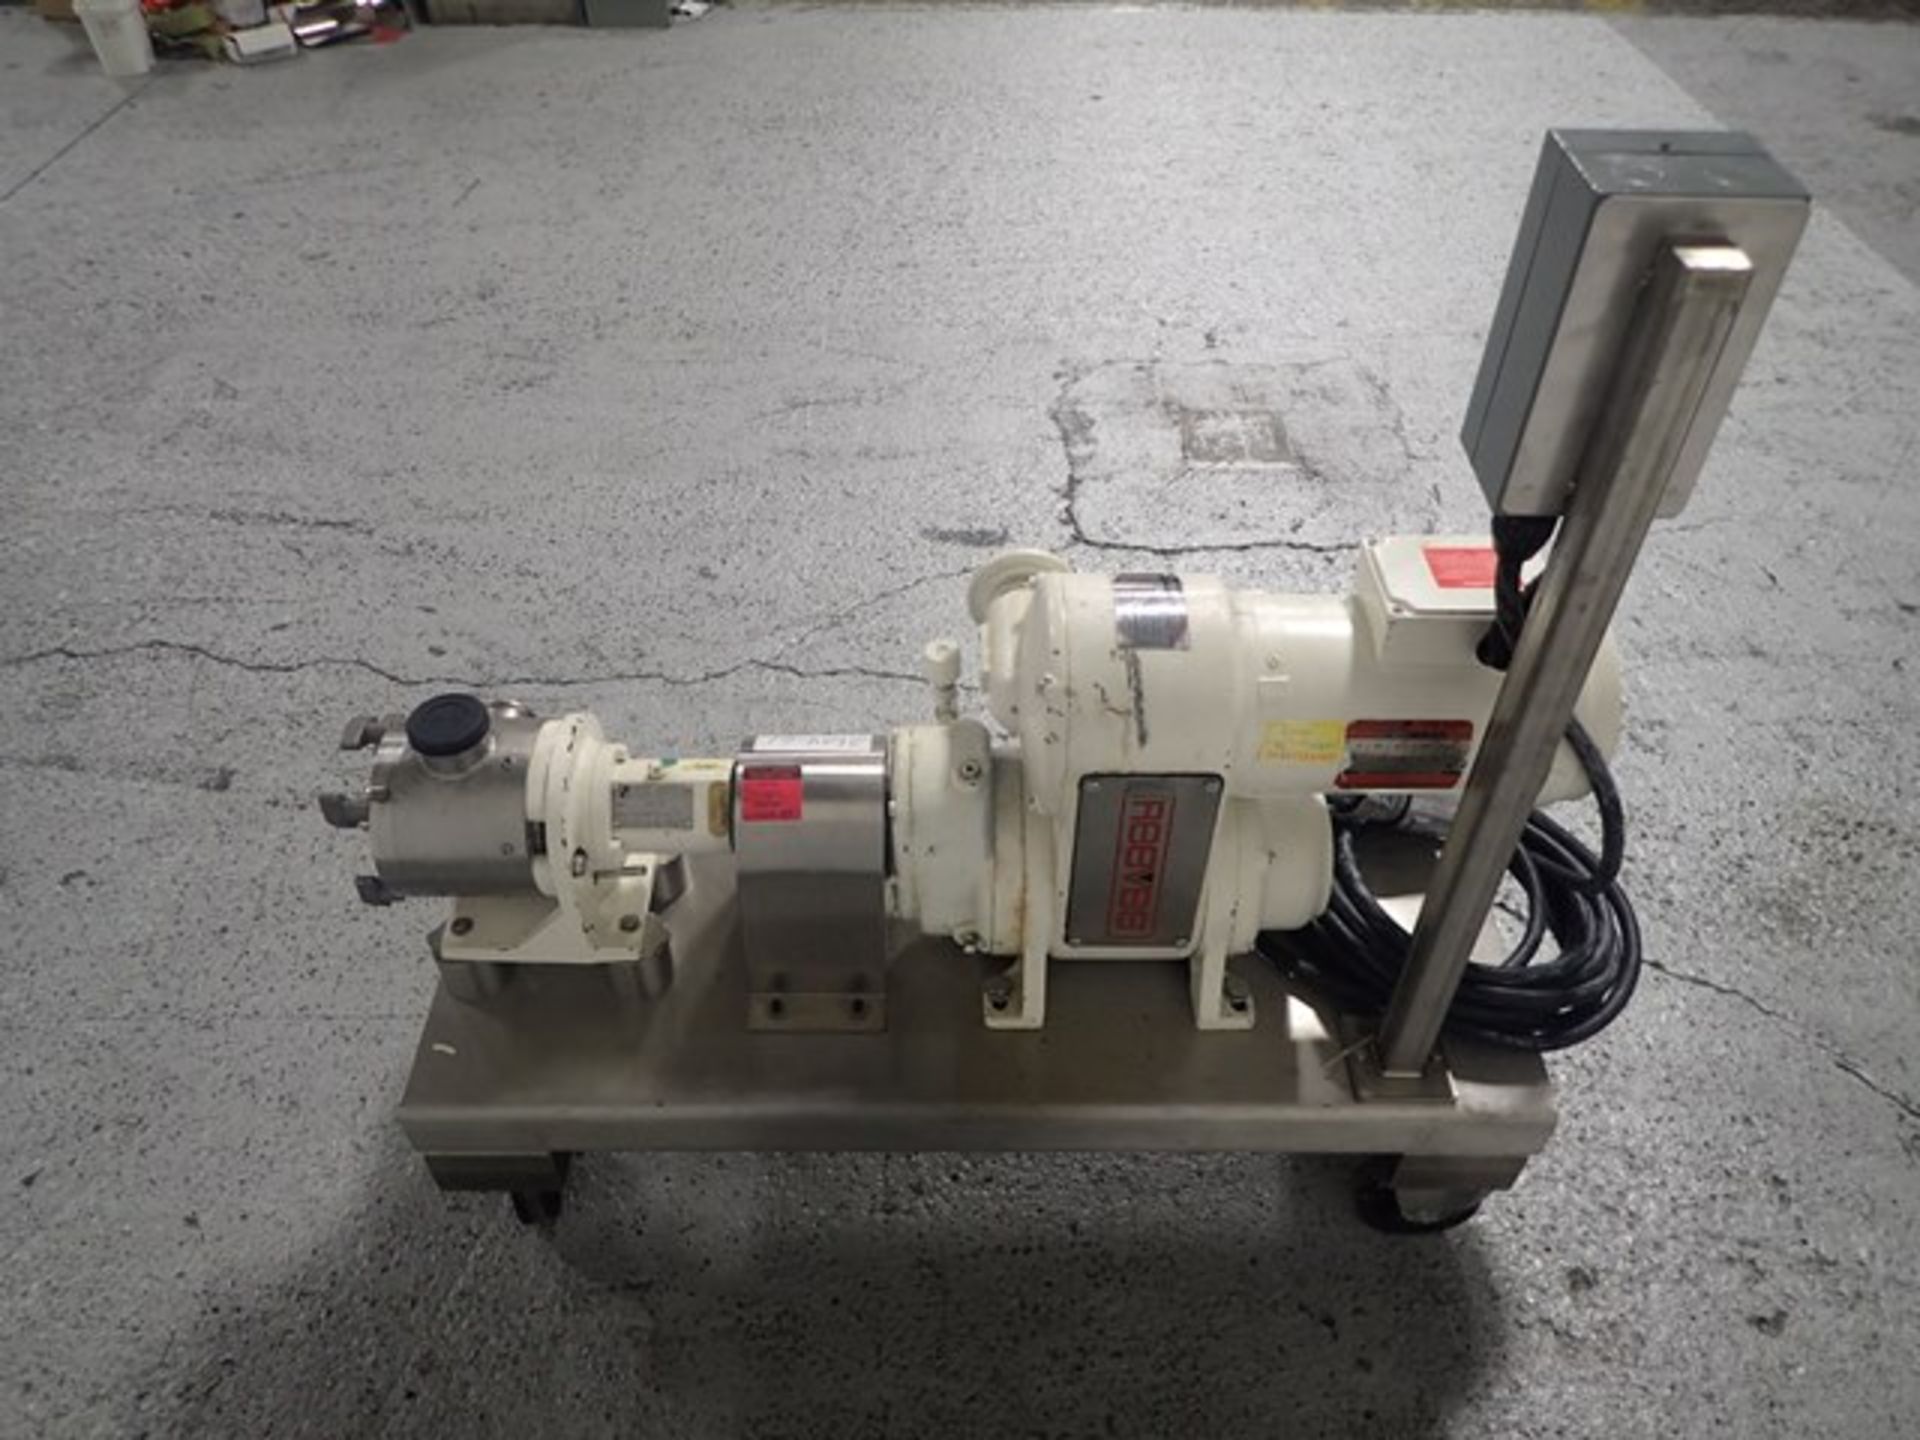 Watson-Marlow Sine pump, model MR120HNTC, stainless steel construction, 2" inlet and outlet - Image 4 of 9